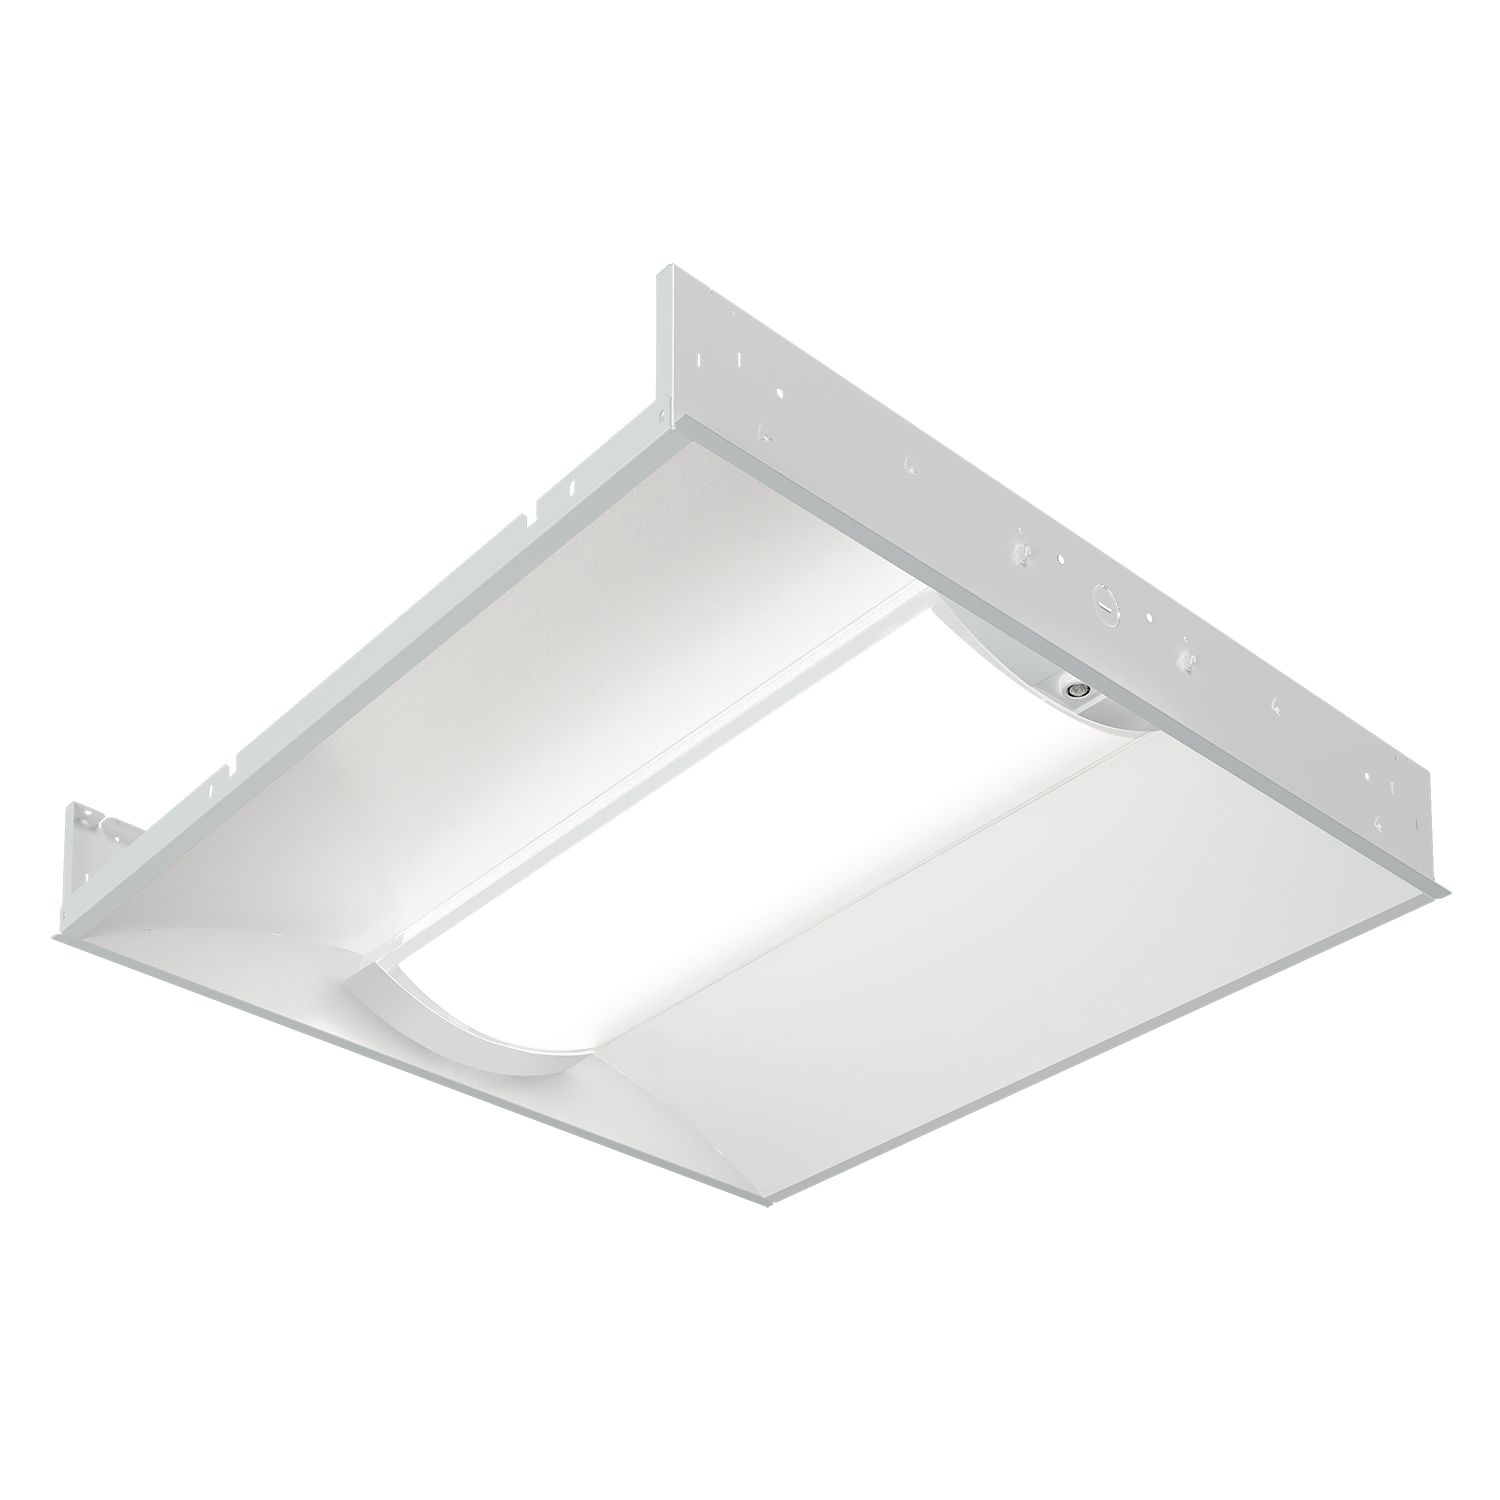 Class RX/ZX LED | Cooper Lighting Solutions | Cooper Lighting 